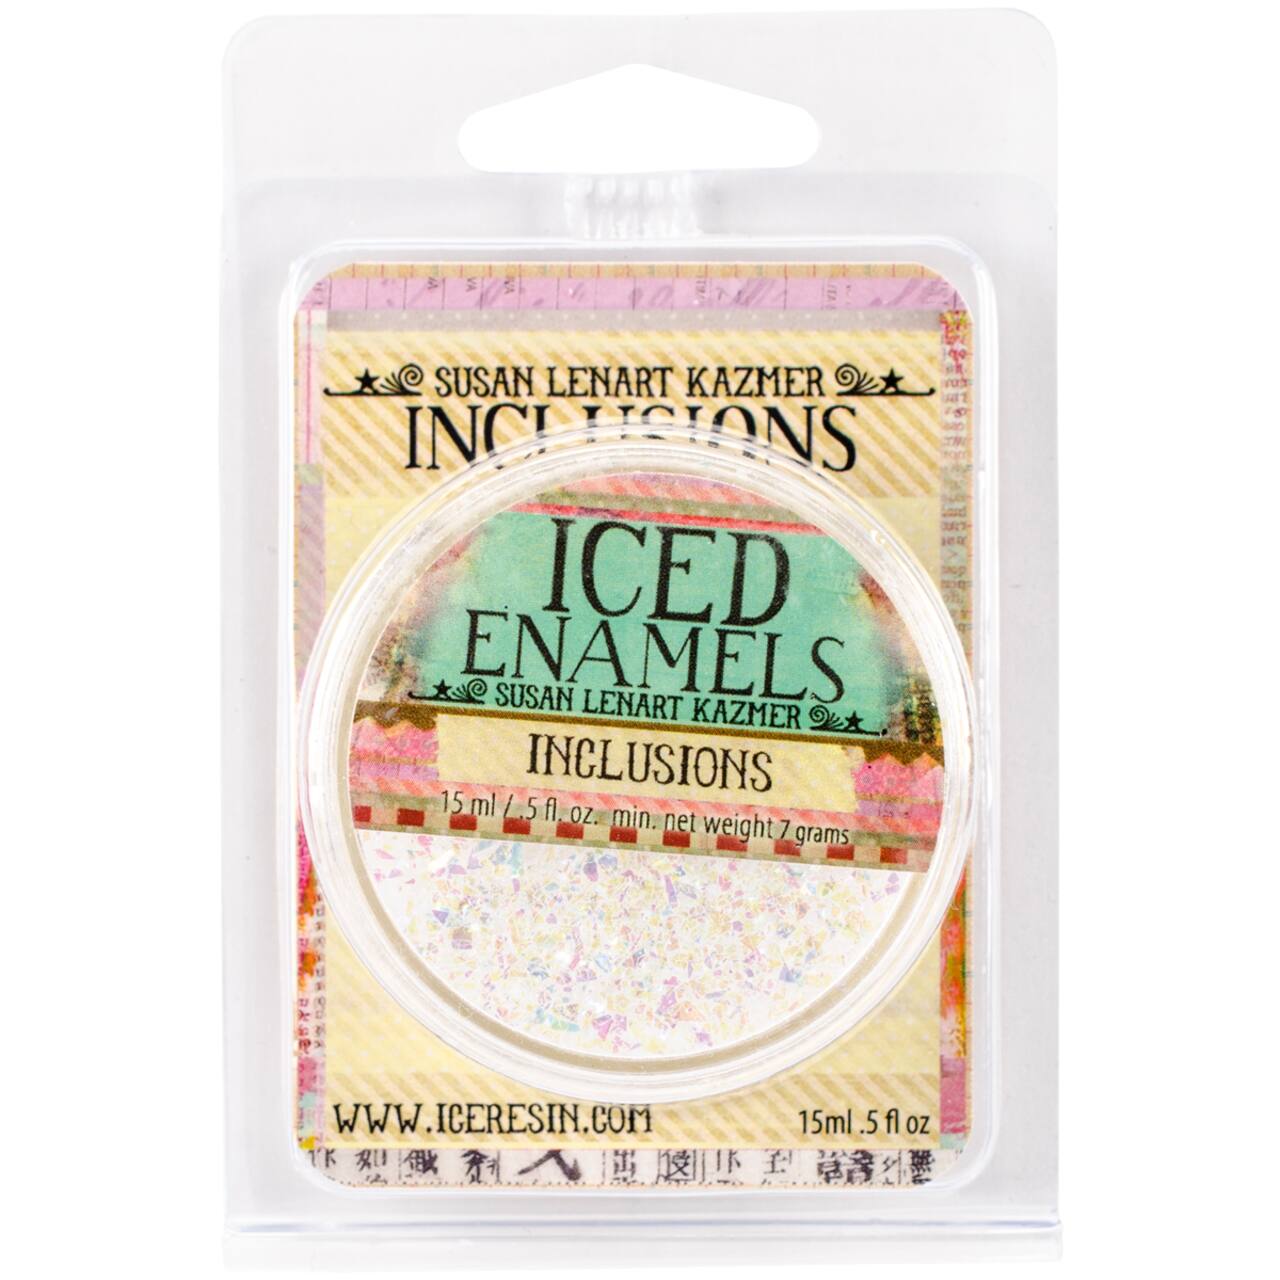 Iced Enamels Inclusions Opal Mica, 0.5oz.